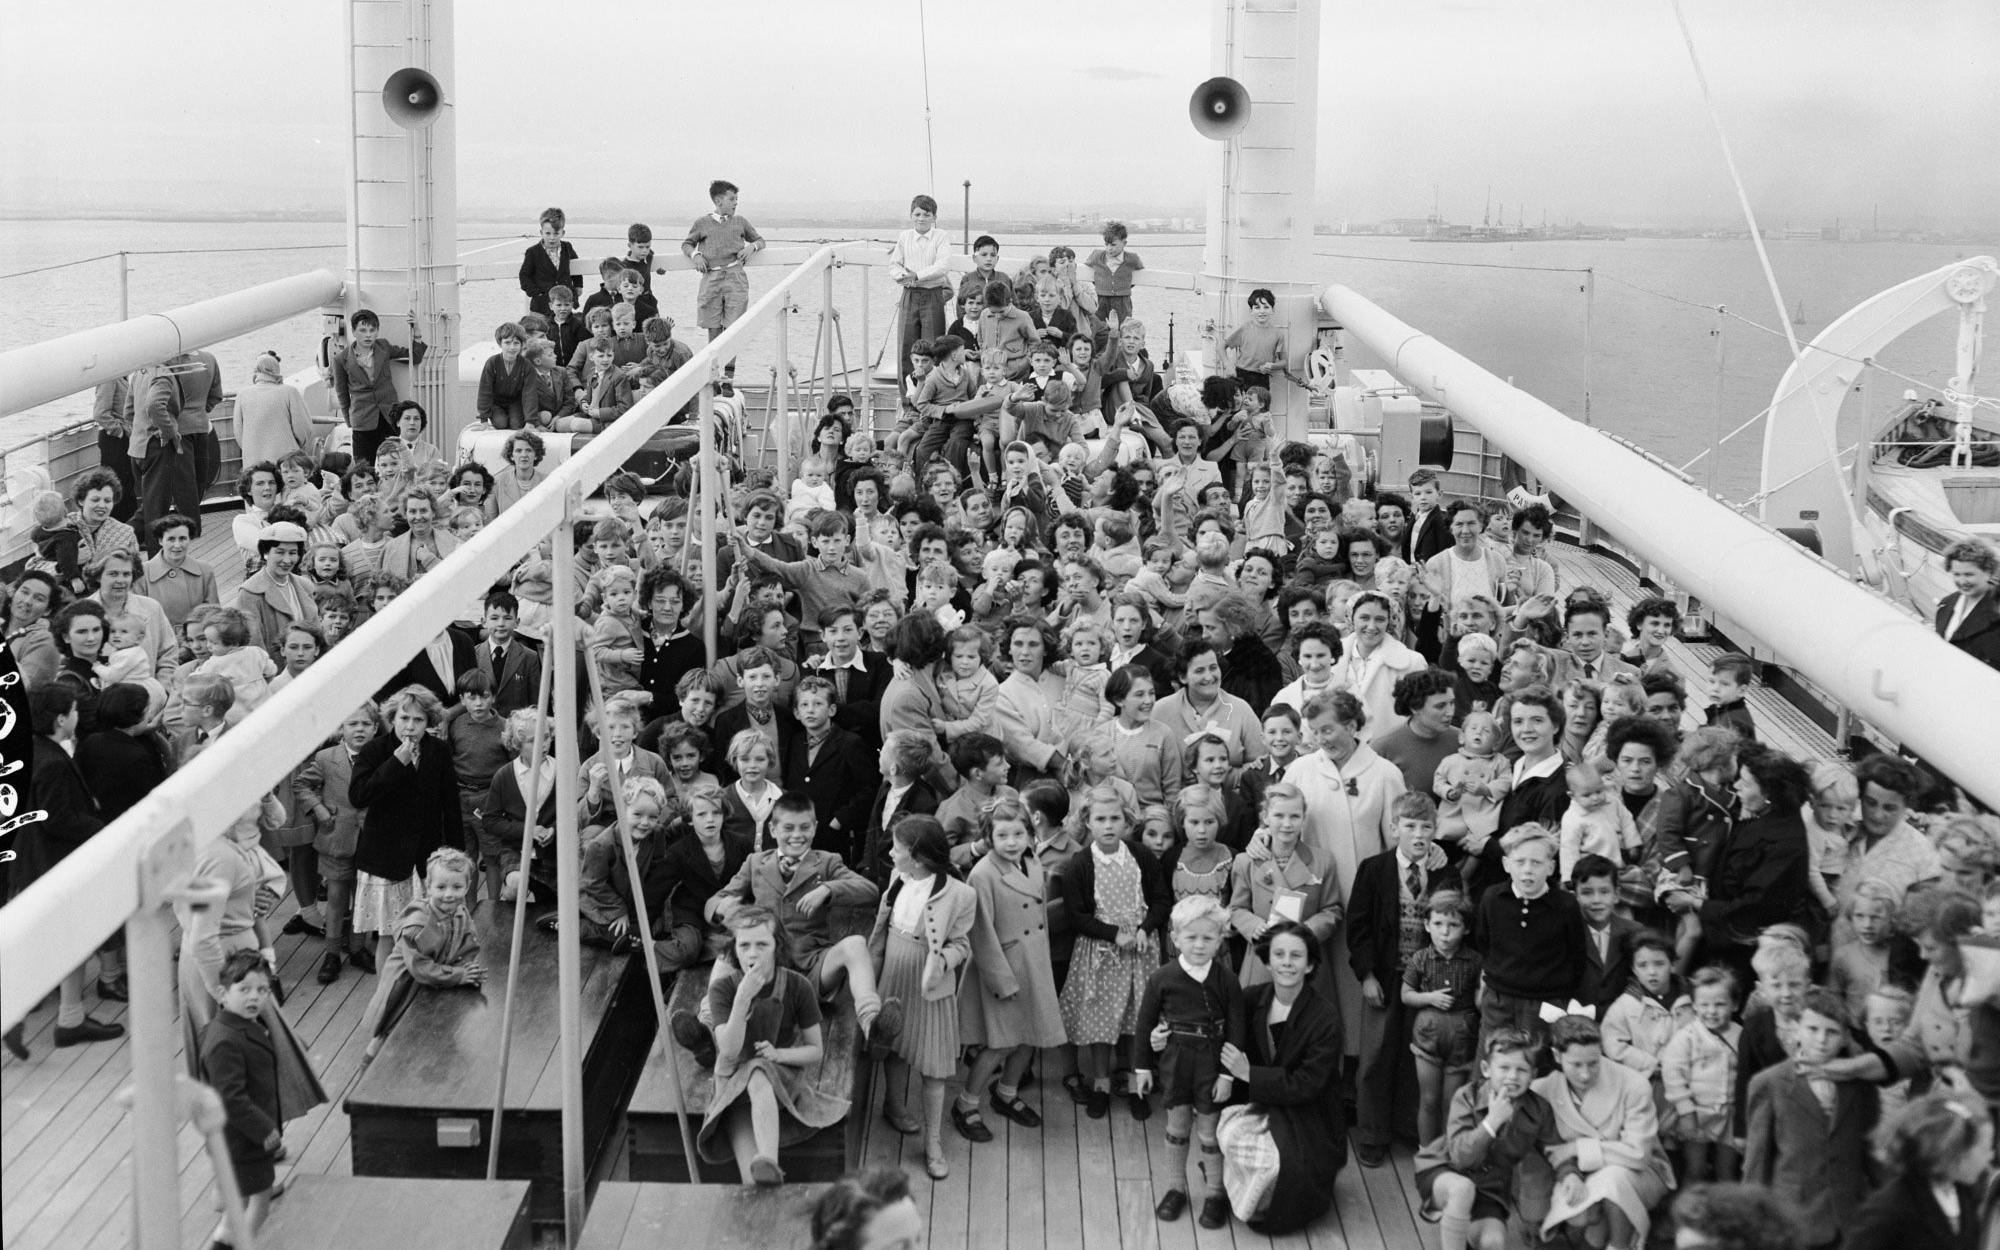 530 children under the age of 14 arrive at Port Melbourne aboard the Fairsea from the United Kingdom, 1956.